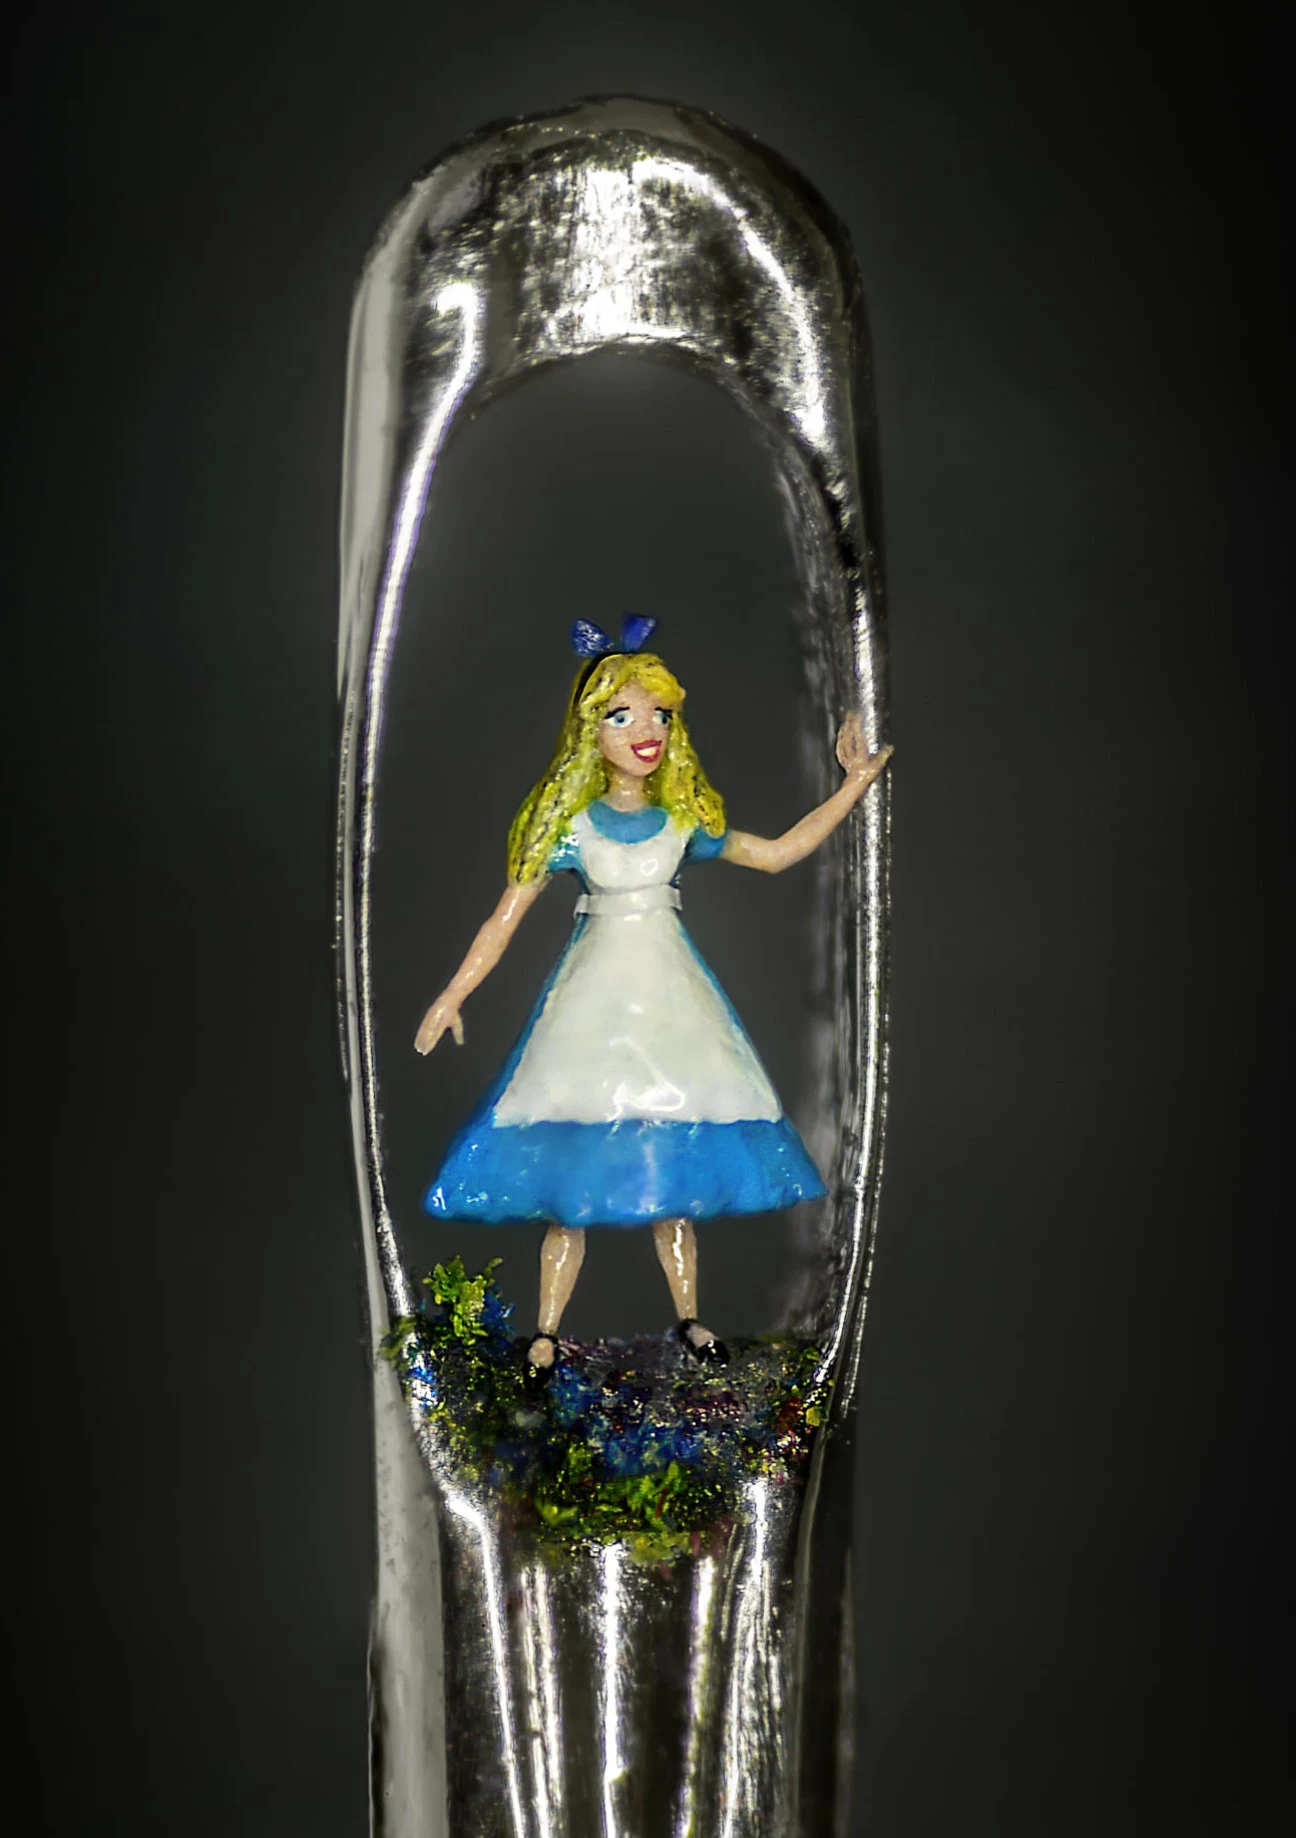 Tiny Alice in Wonderland sculpture in the eye of a needle.